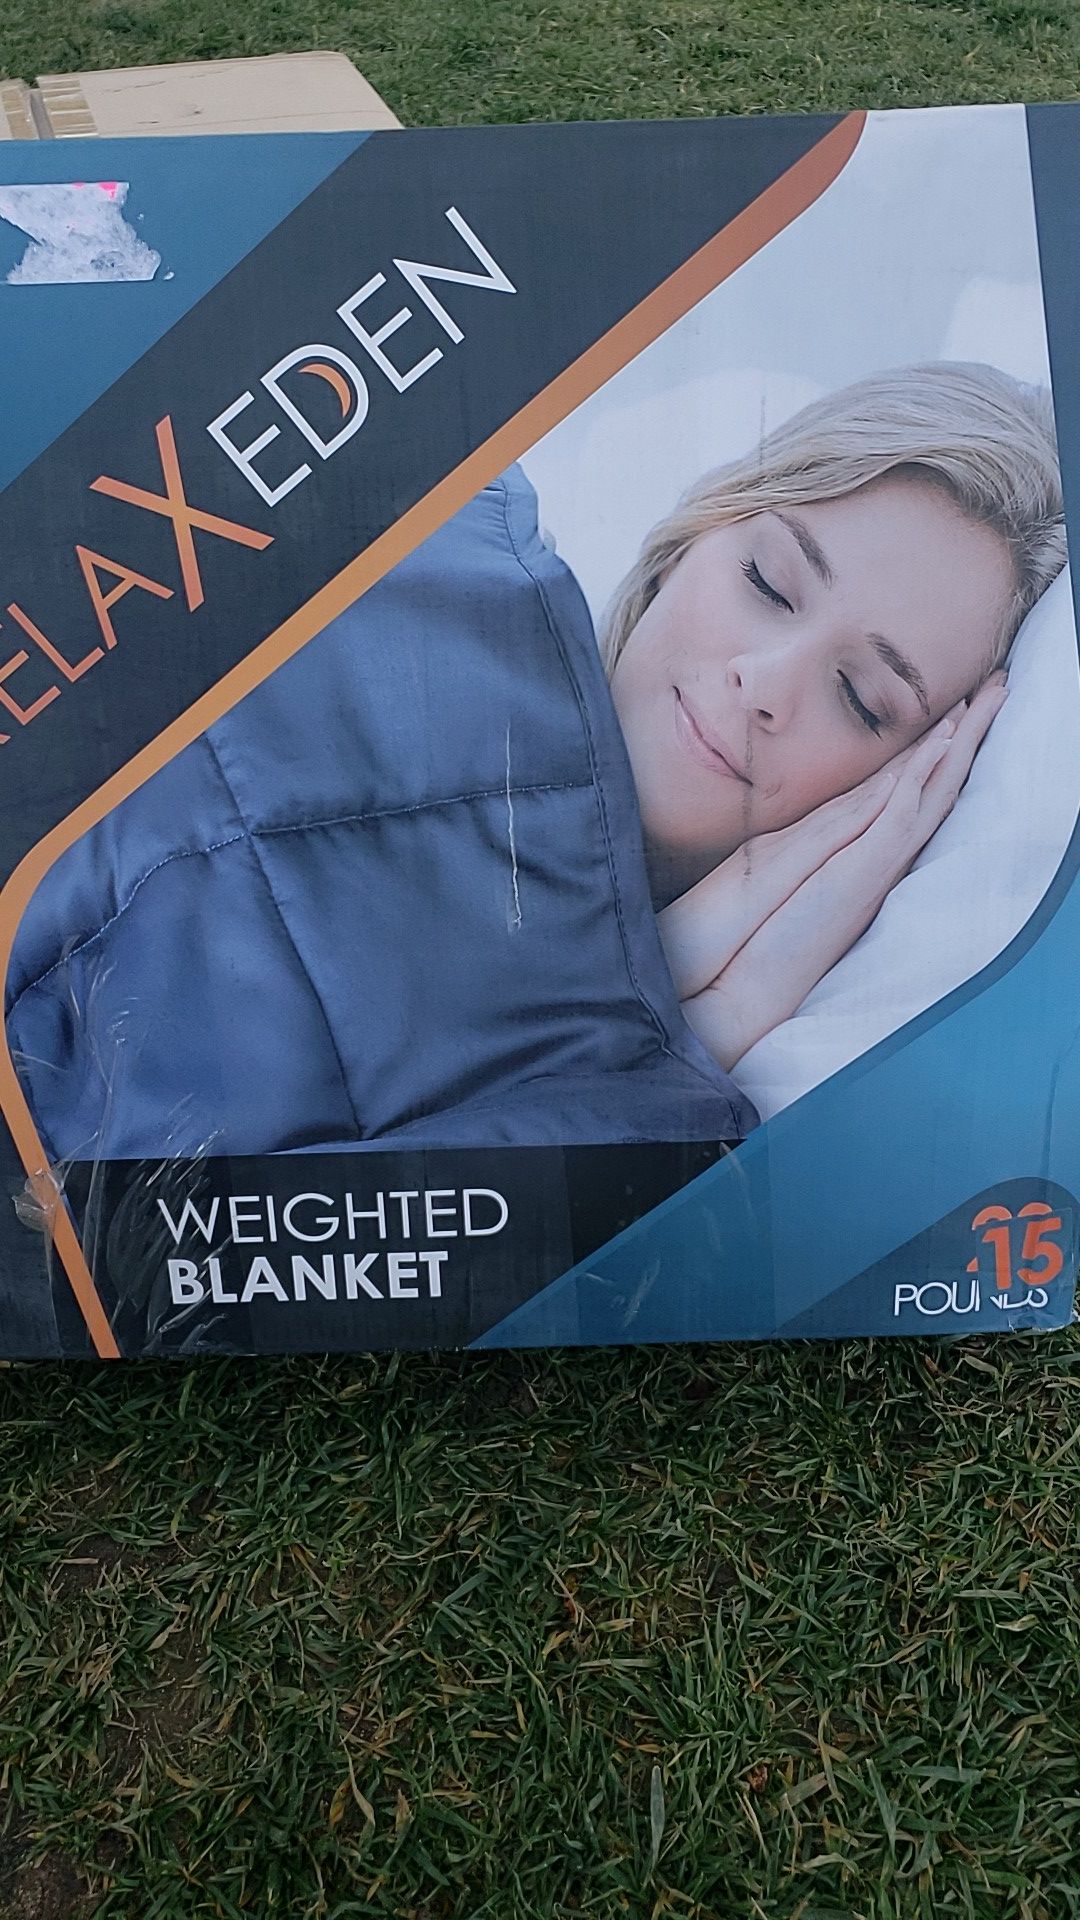 New weighted blanket